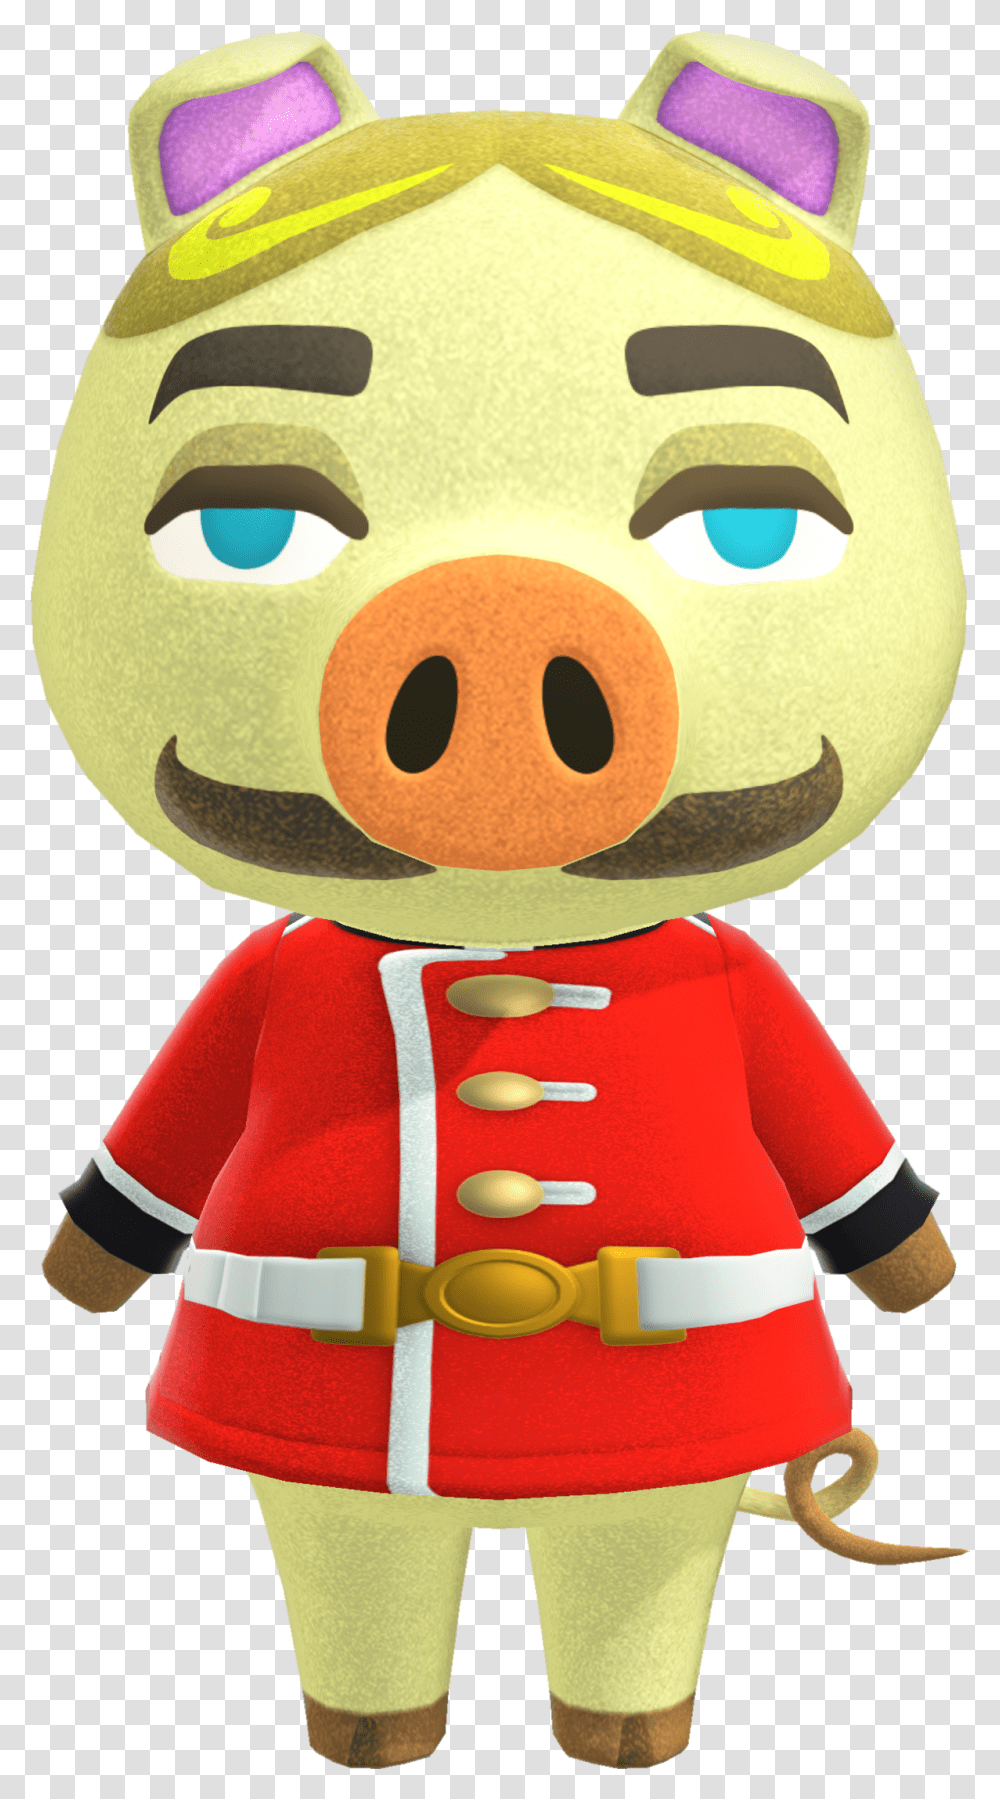 Chops Animal Crossing Wiki Nookipedia Chops Animal Crossing New Horizons, Doll, Toy, Person, Human Transparent Png